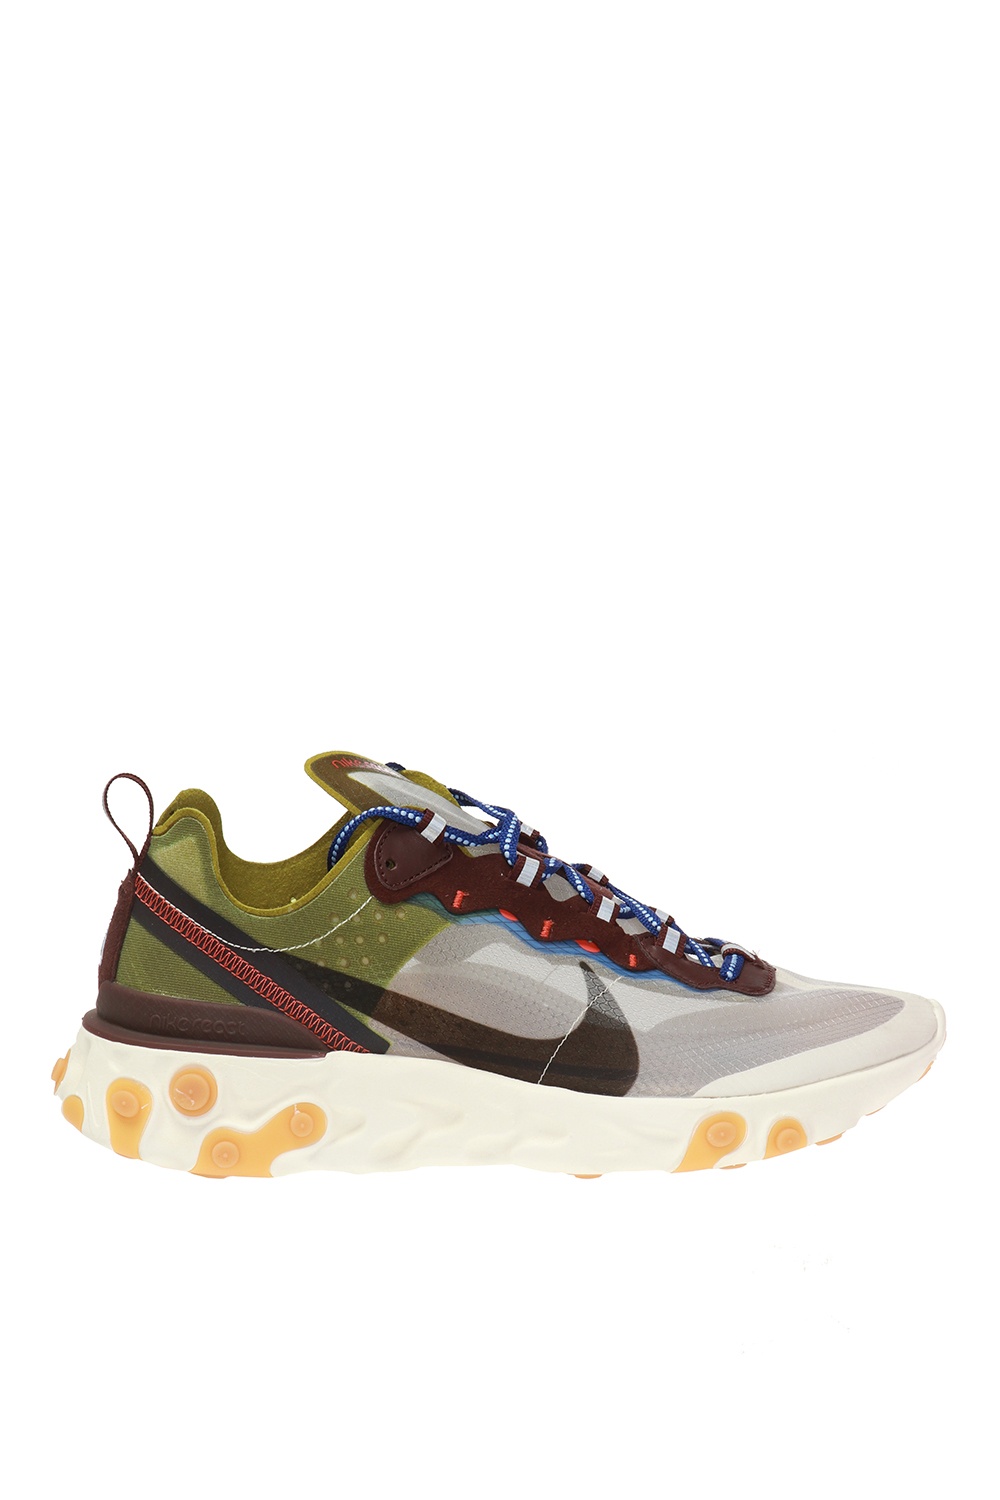 nike react element 87 size guide